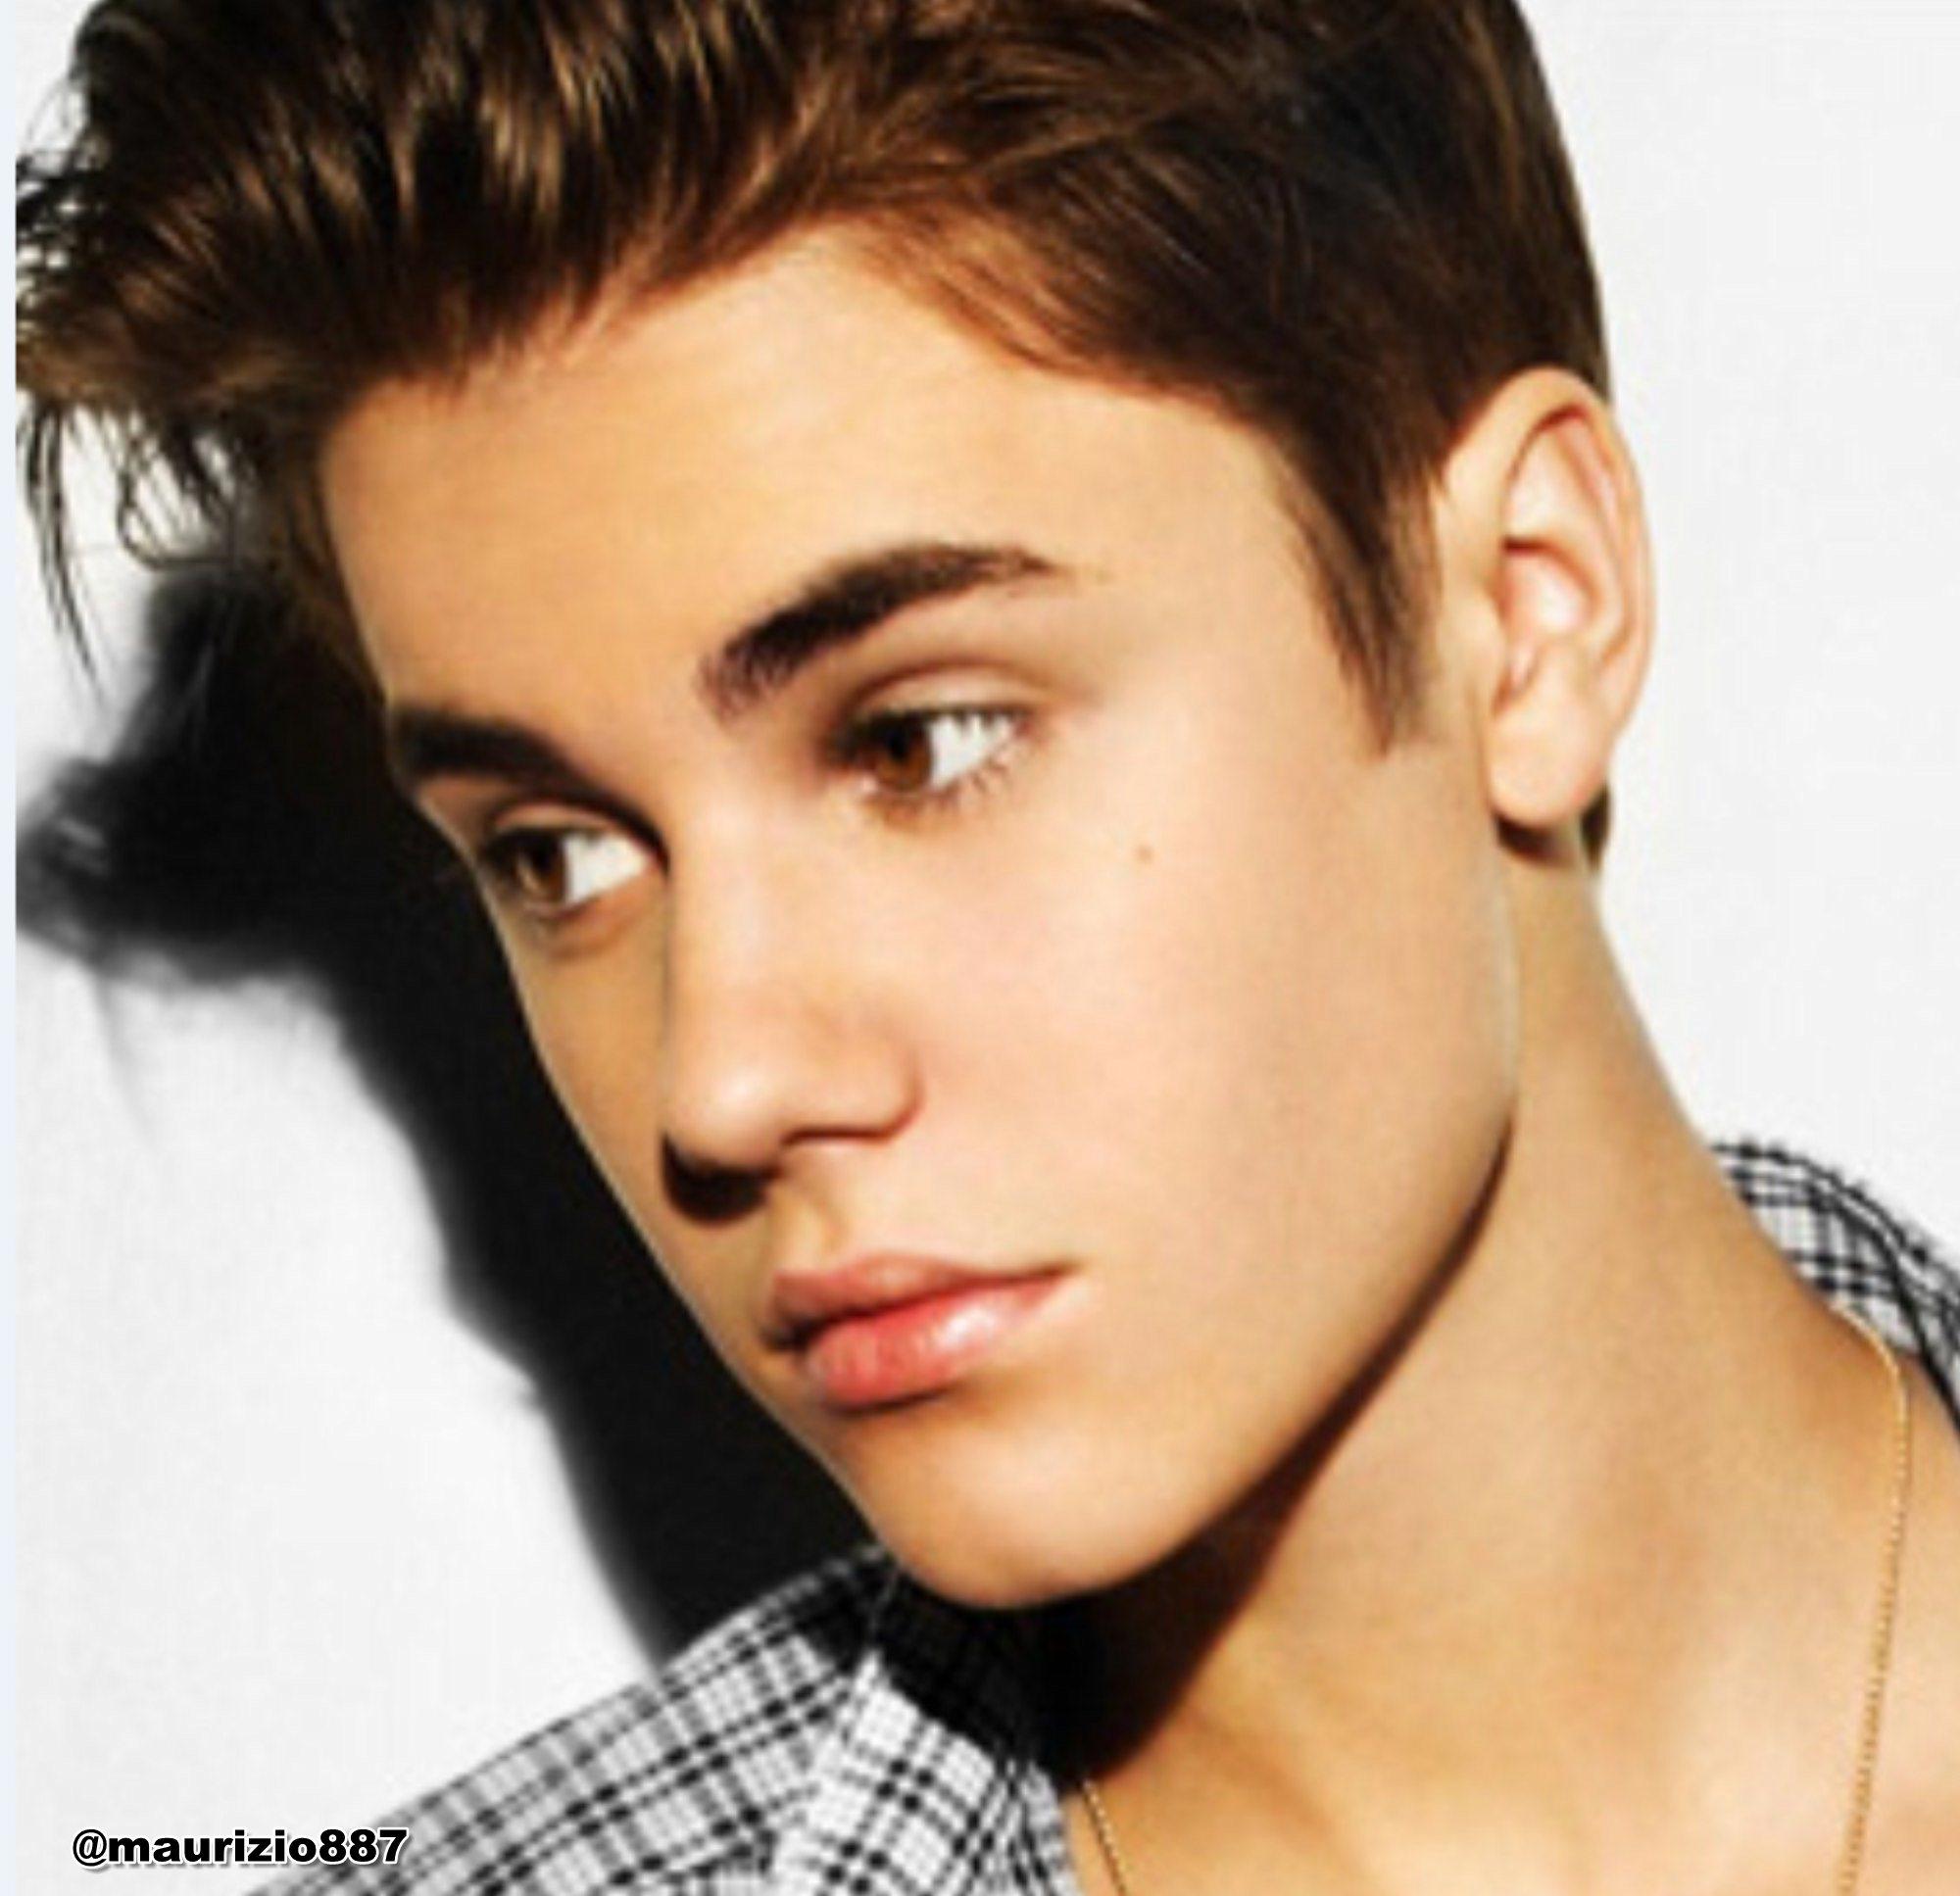 Justin Beiber Become Most Followed Celebrity On Twitter | NAIJAVIBE2000 x 1935